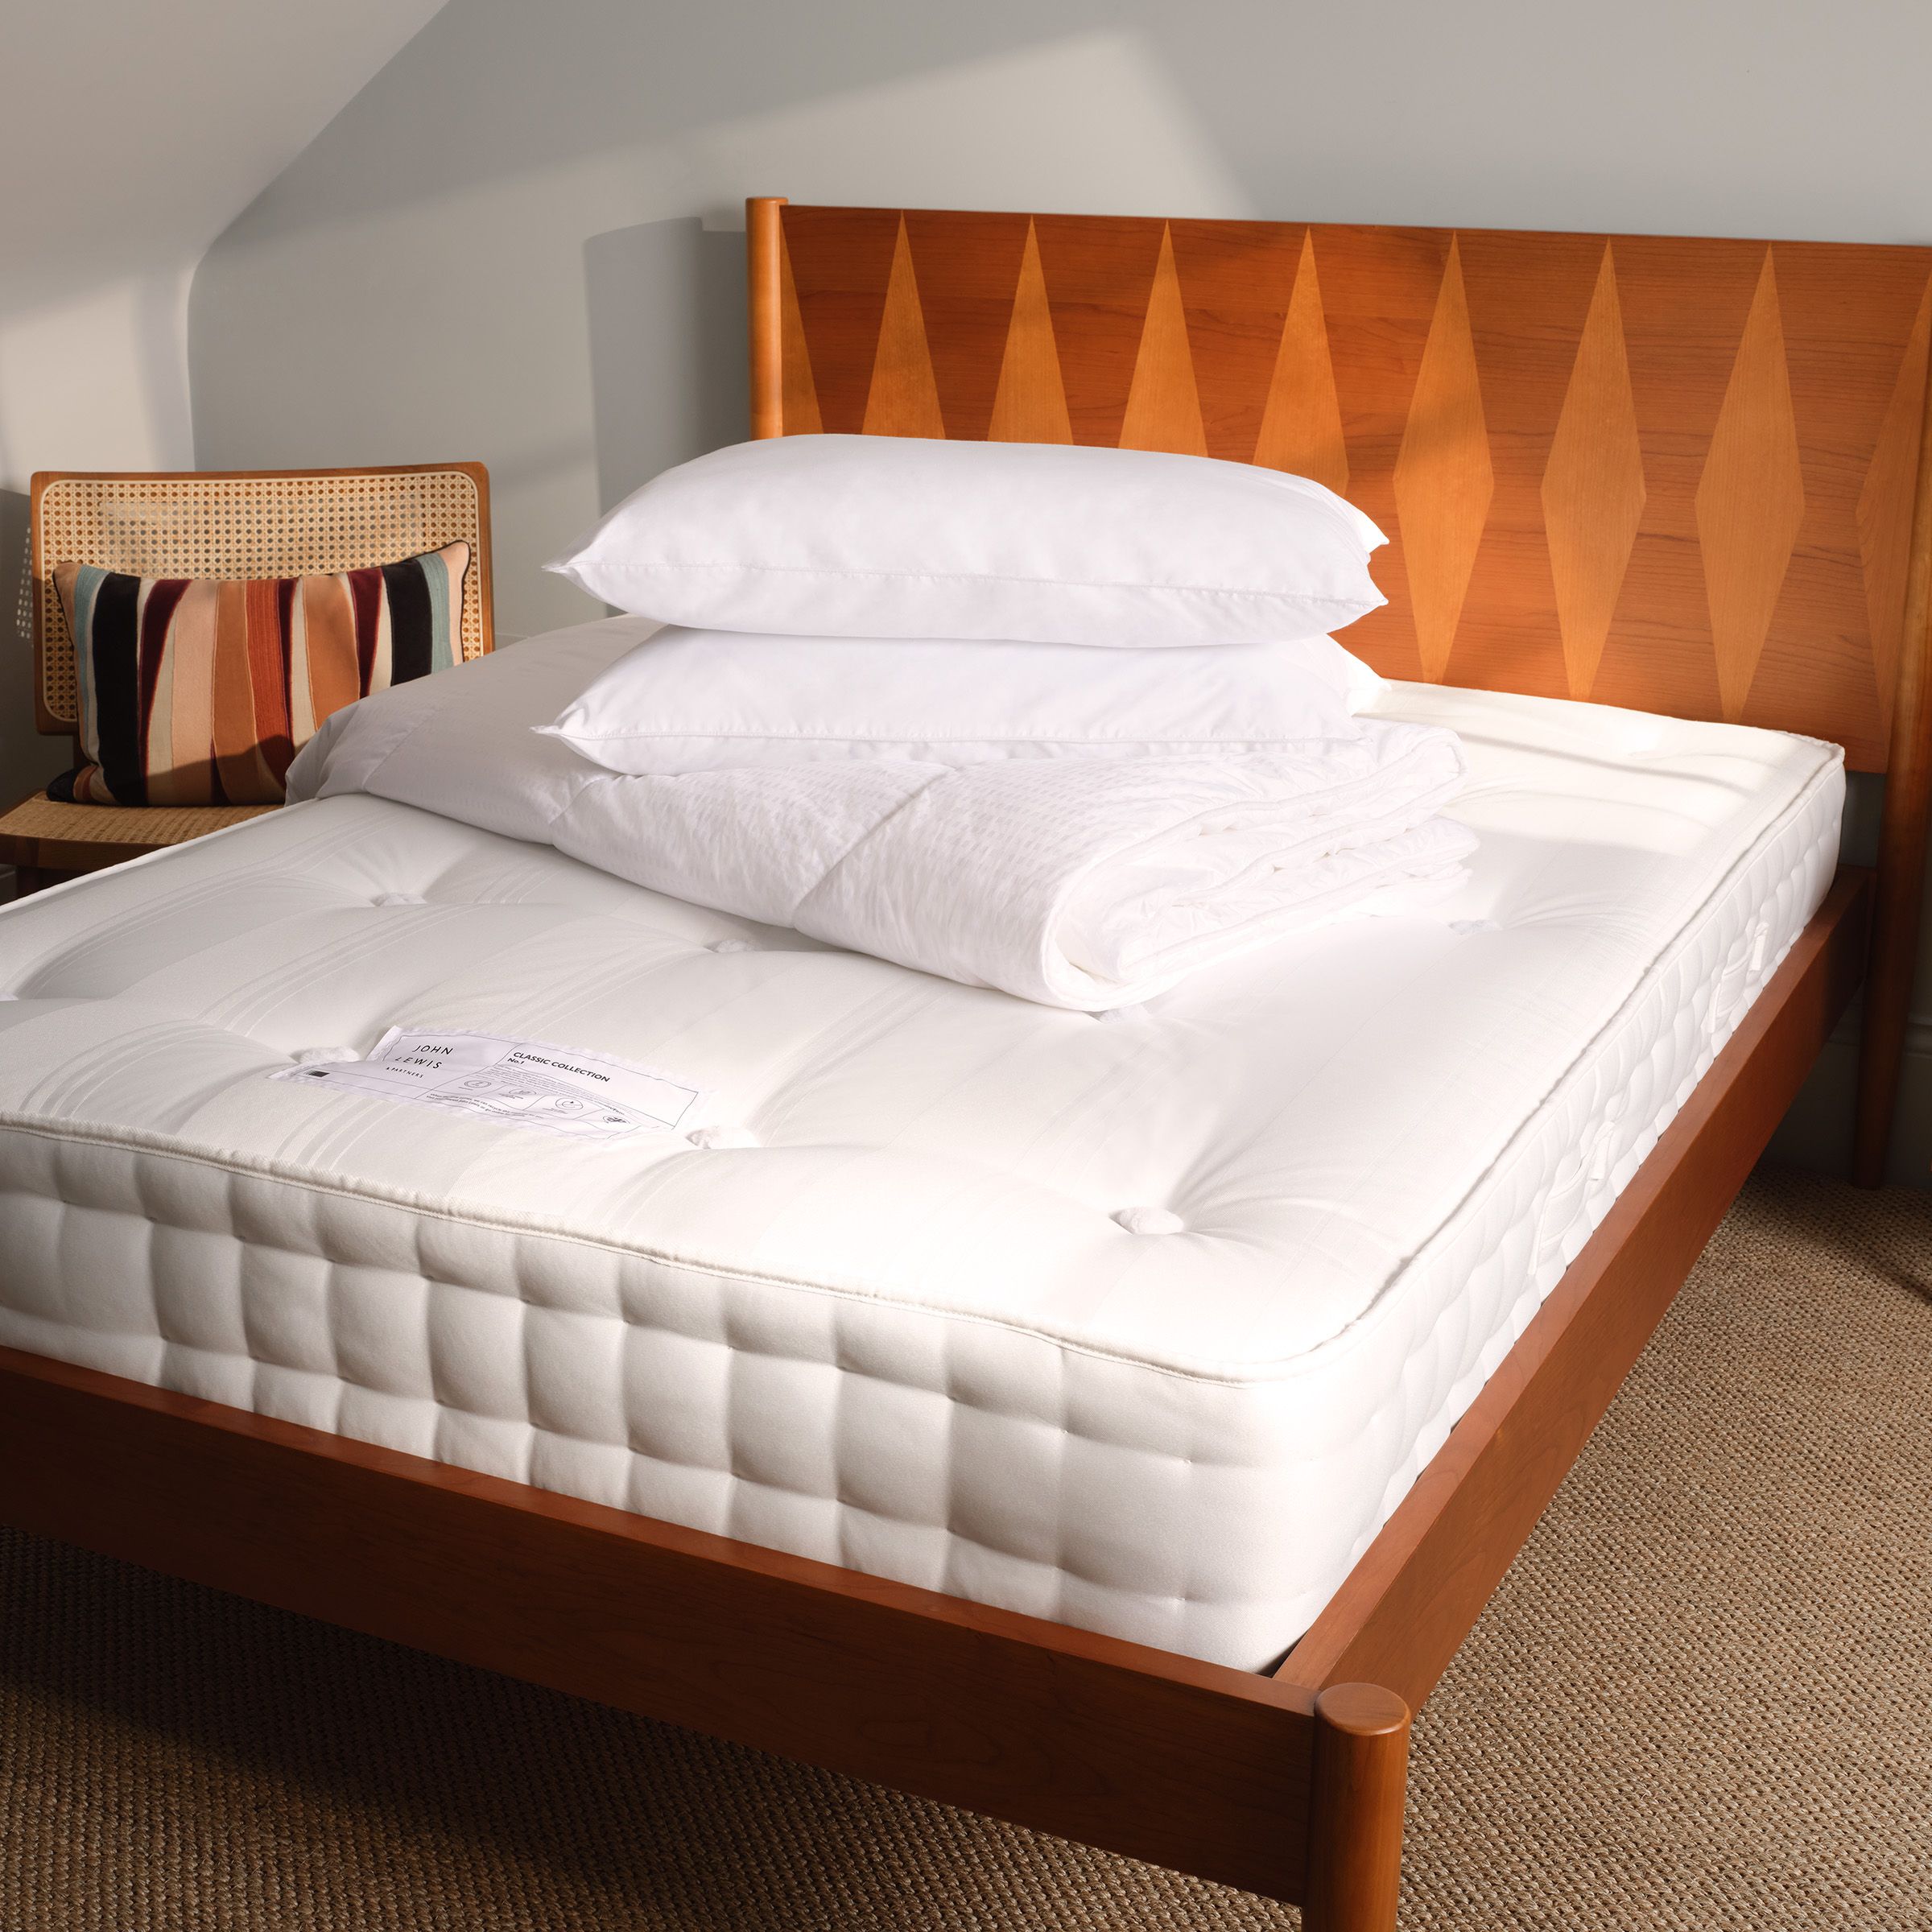 Brown bed frame with white mattress, white cushions and white duvet